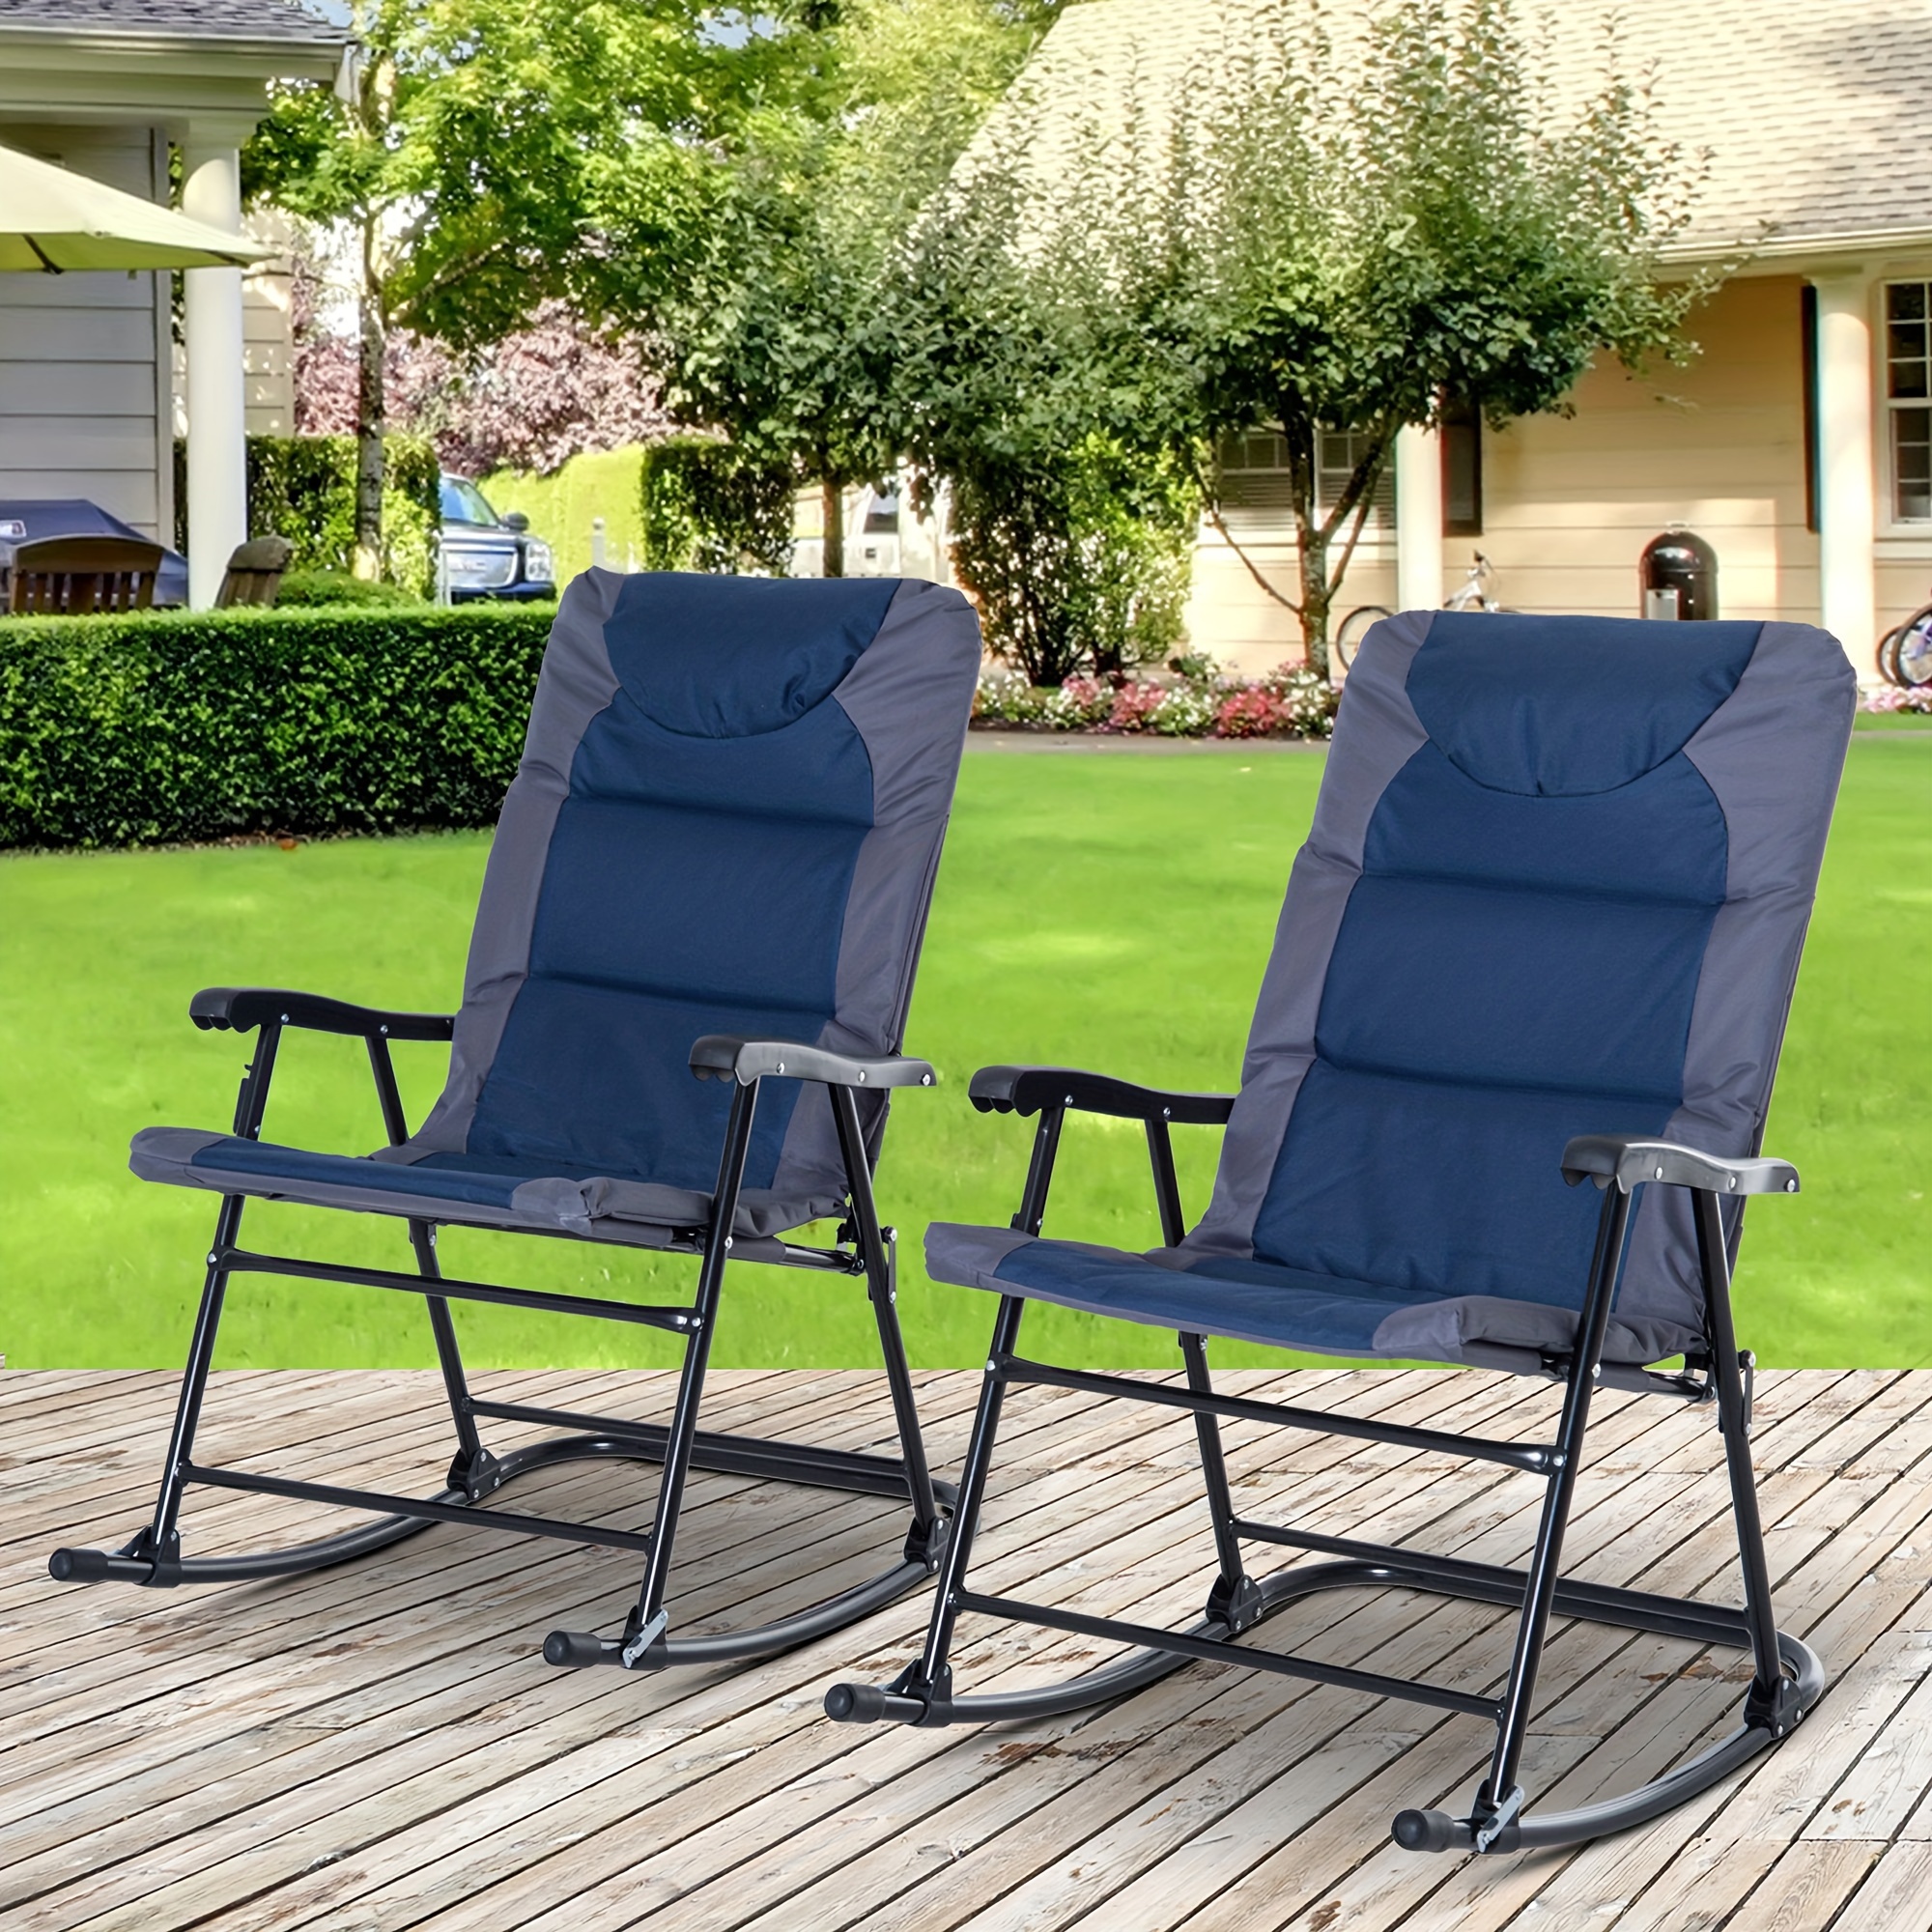 

Outsunny 2 Piece Outdoor Patio Furniture Set With 2 Folding Padded Rocking Chairs, Bistro Style For Porch, Camping, Balcony, Navy Blue